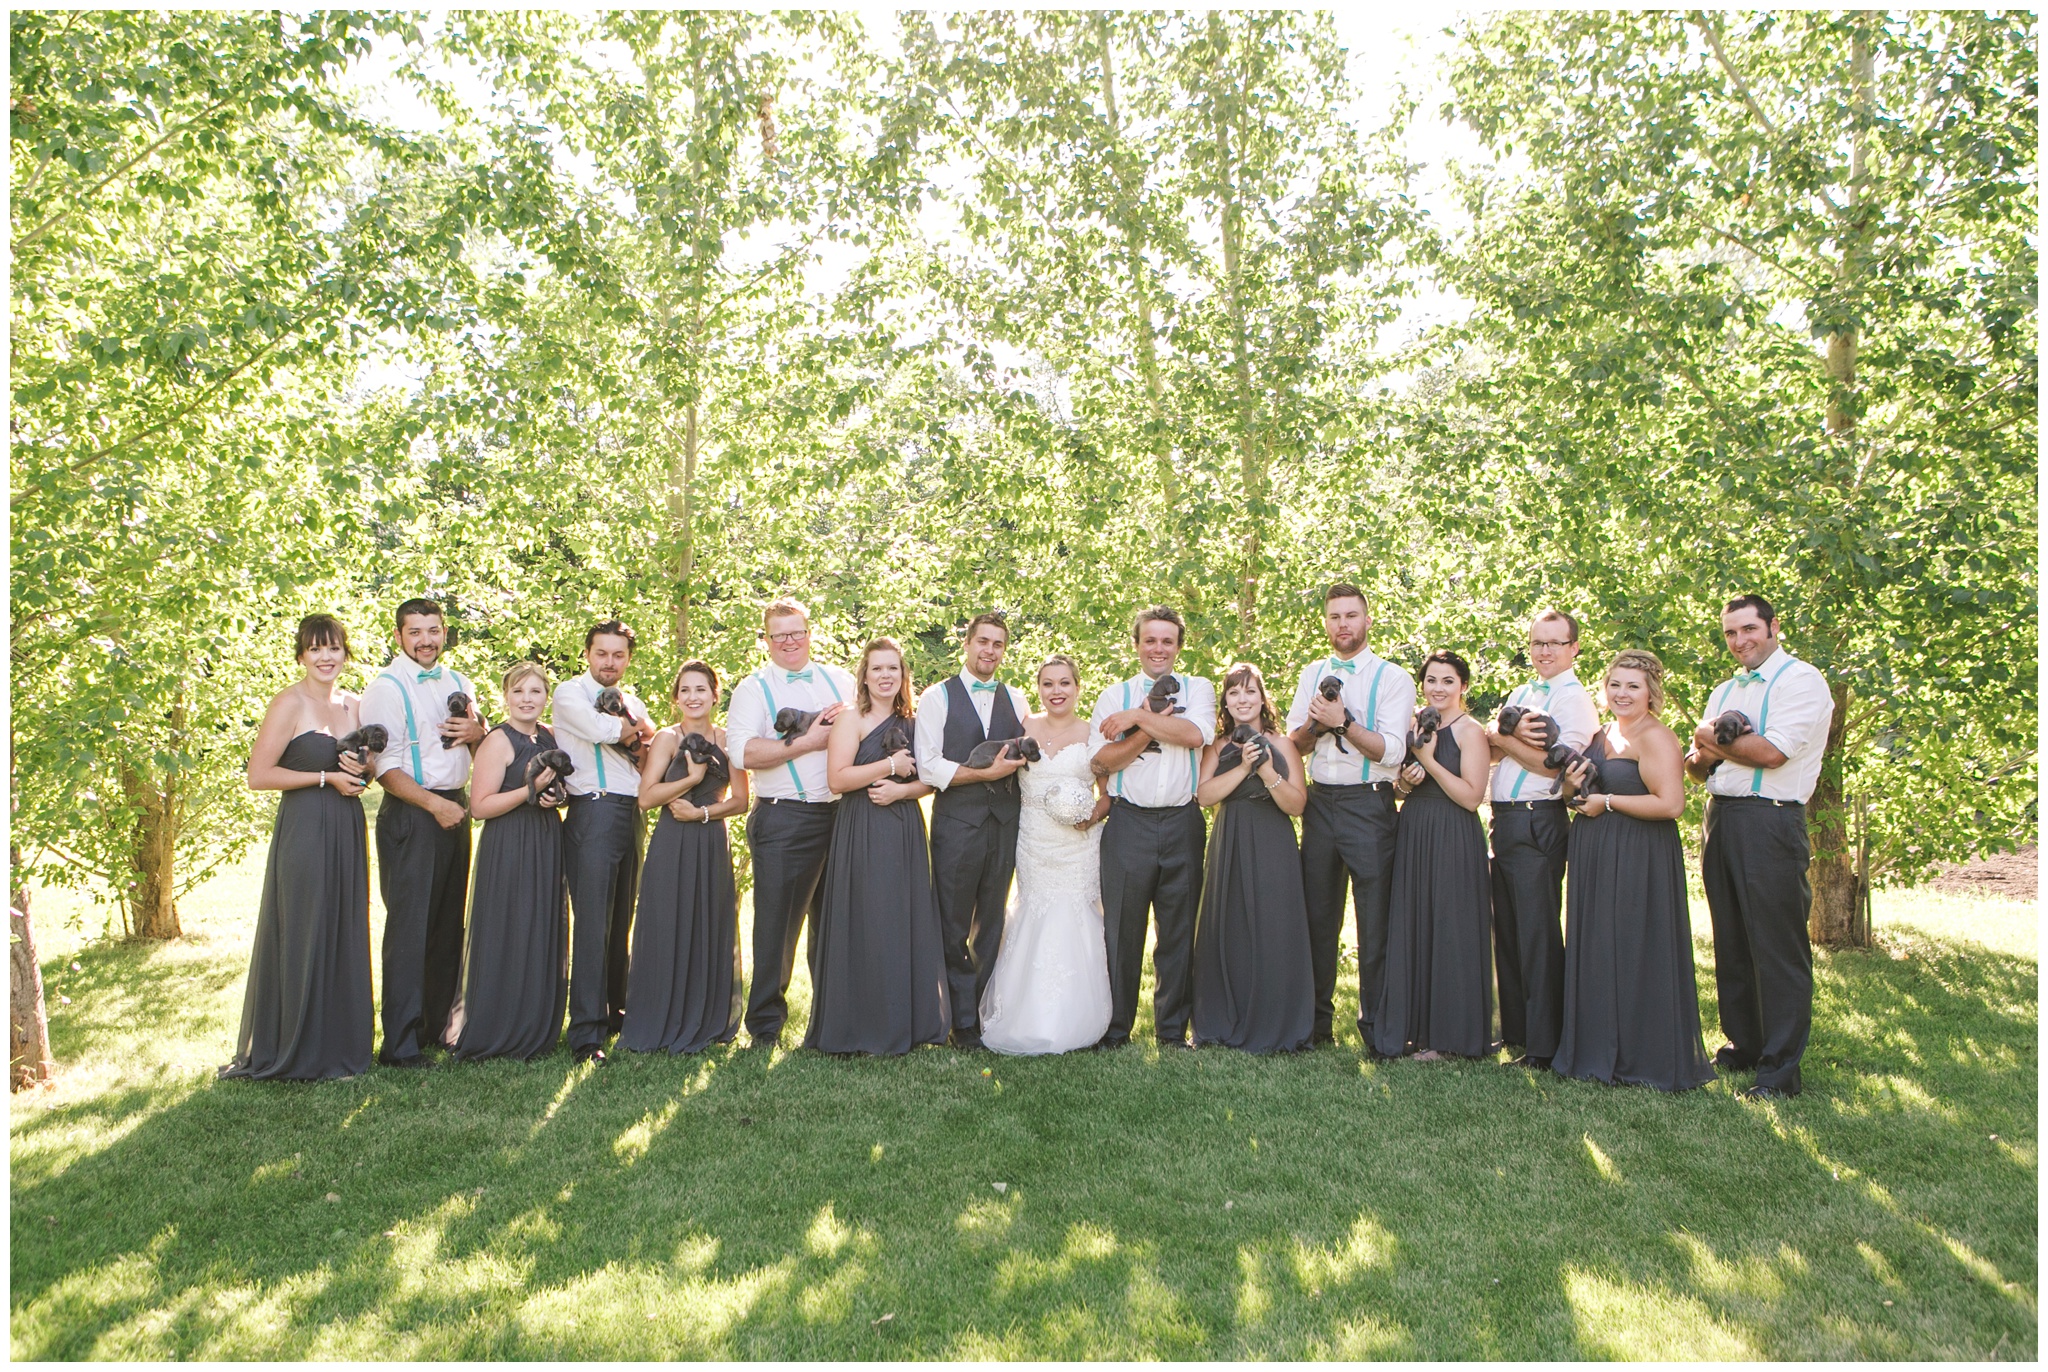 Bridal party holds puppies at wedding photo